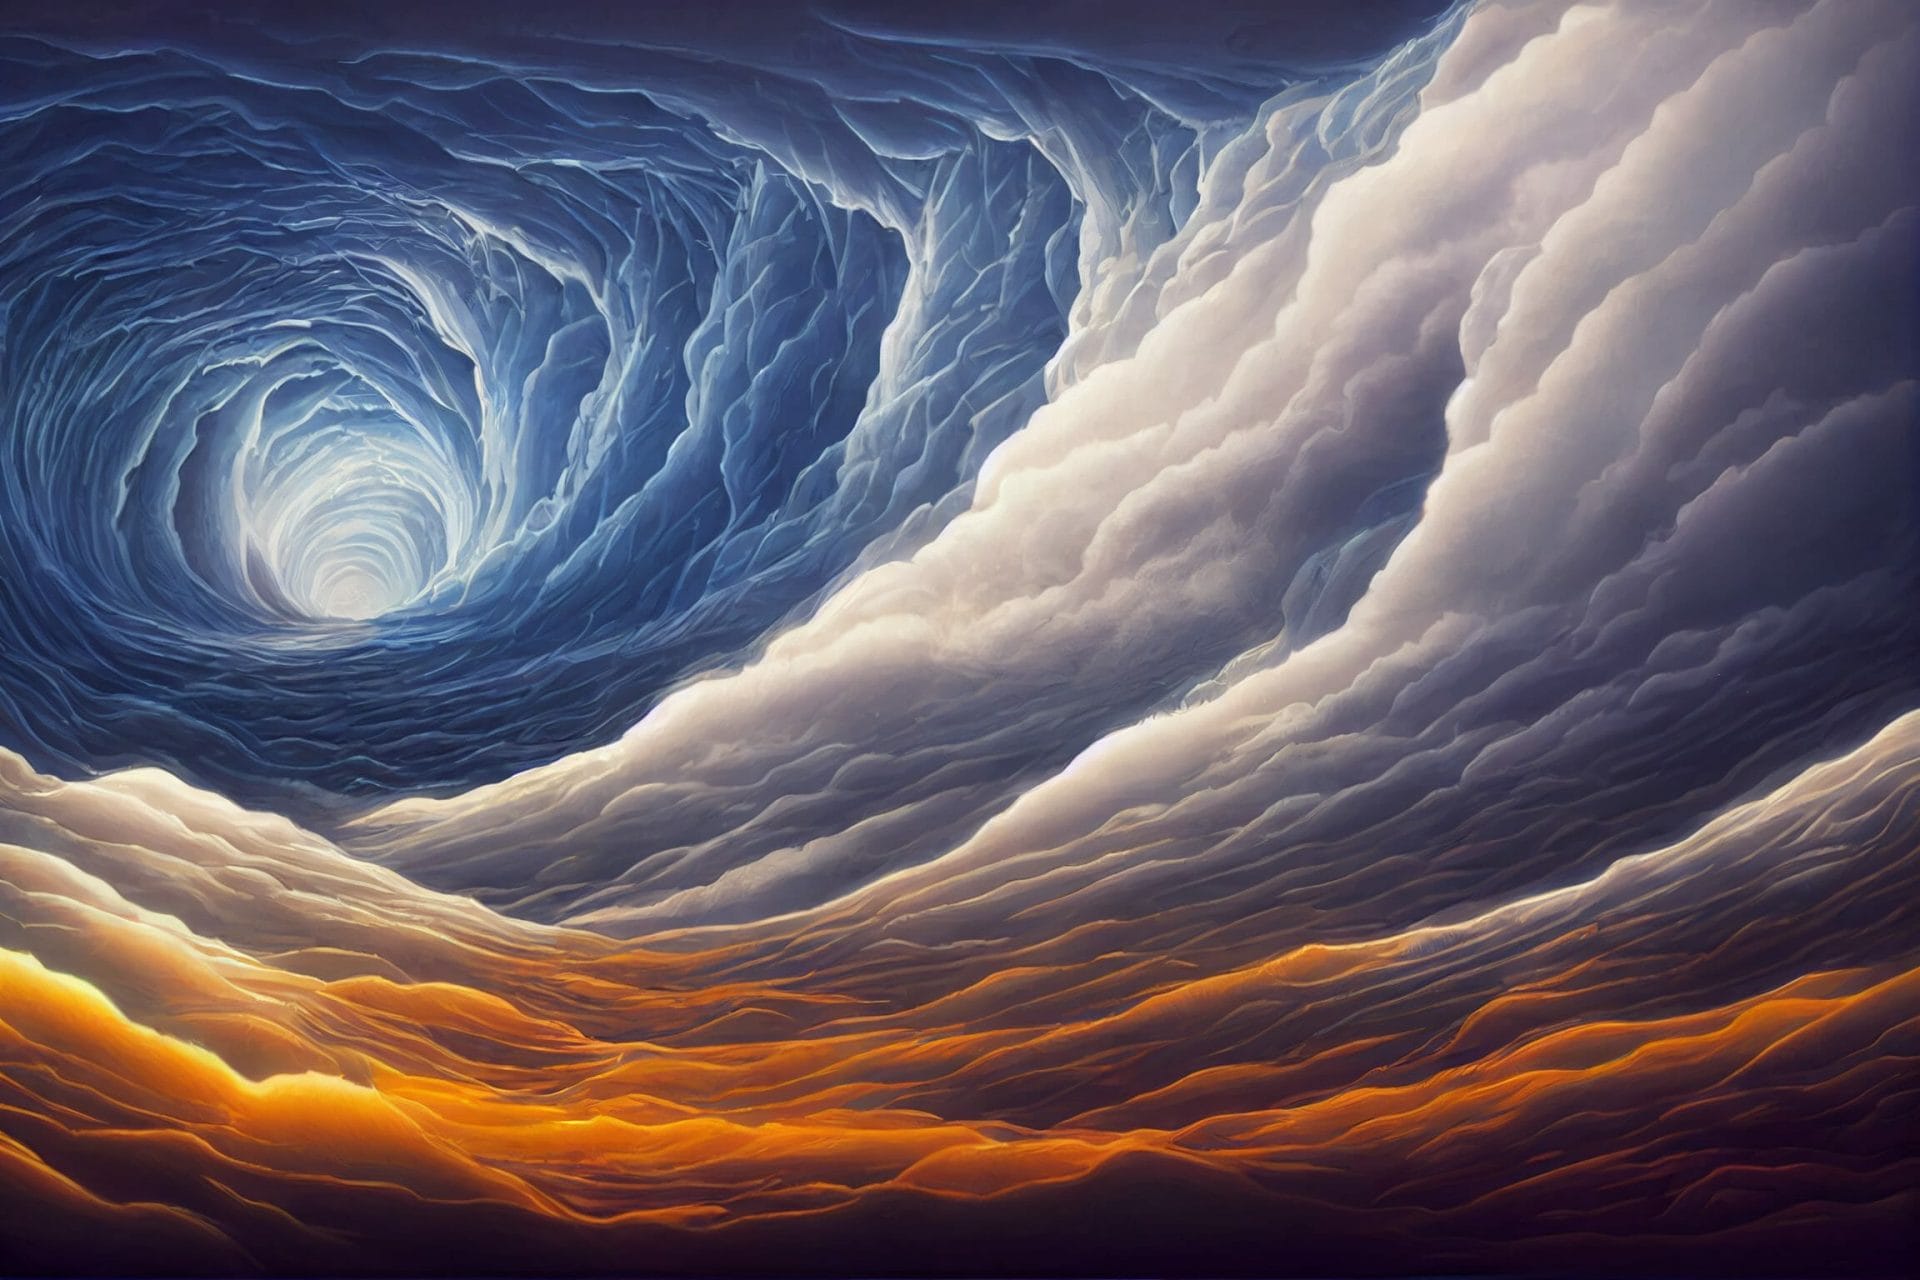 Swirling vortex of clouds and wind [AI]